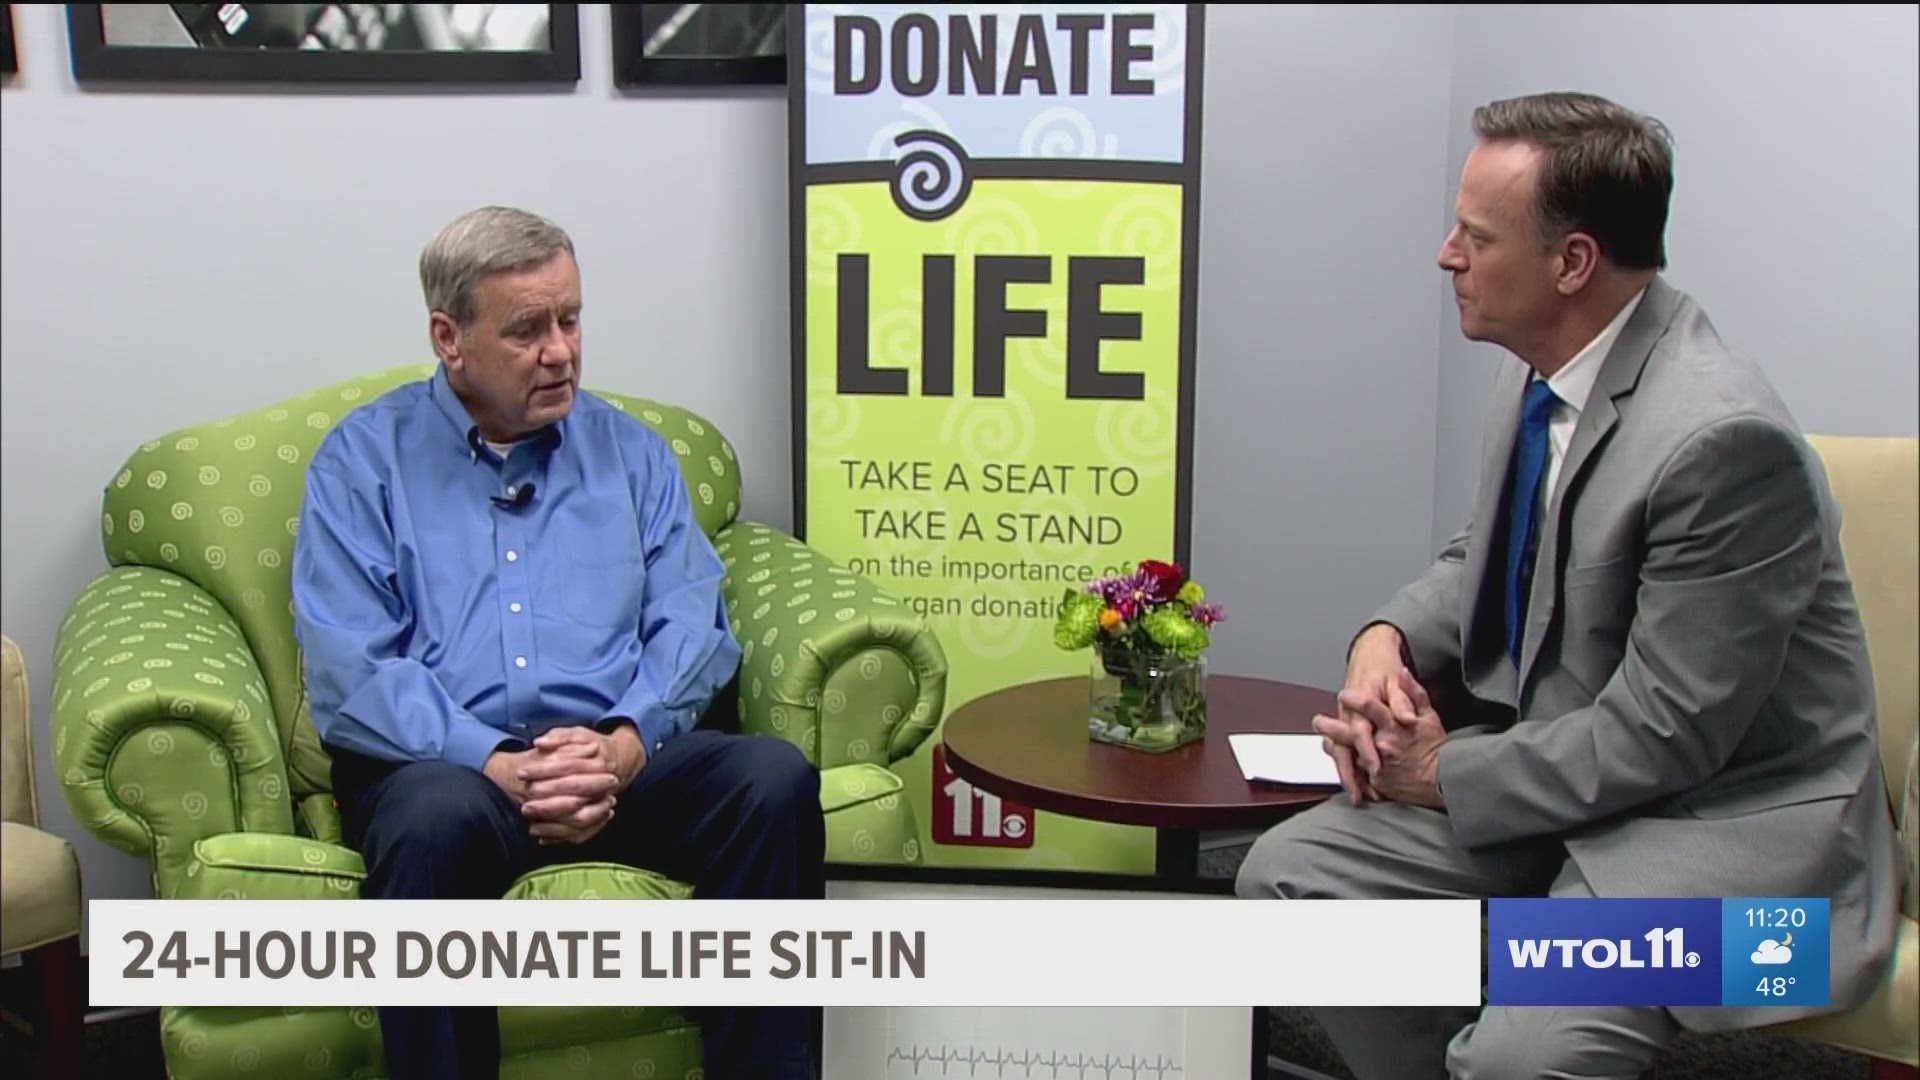 WTOL 11 and Life Connection hosted the annual Green Chair Sit-In for 24 hours to highlight the importance of organ and tissue donation.